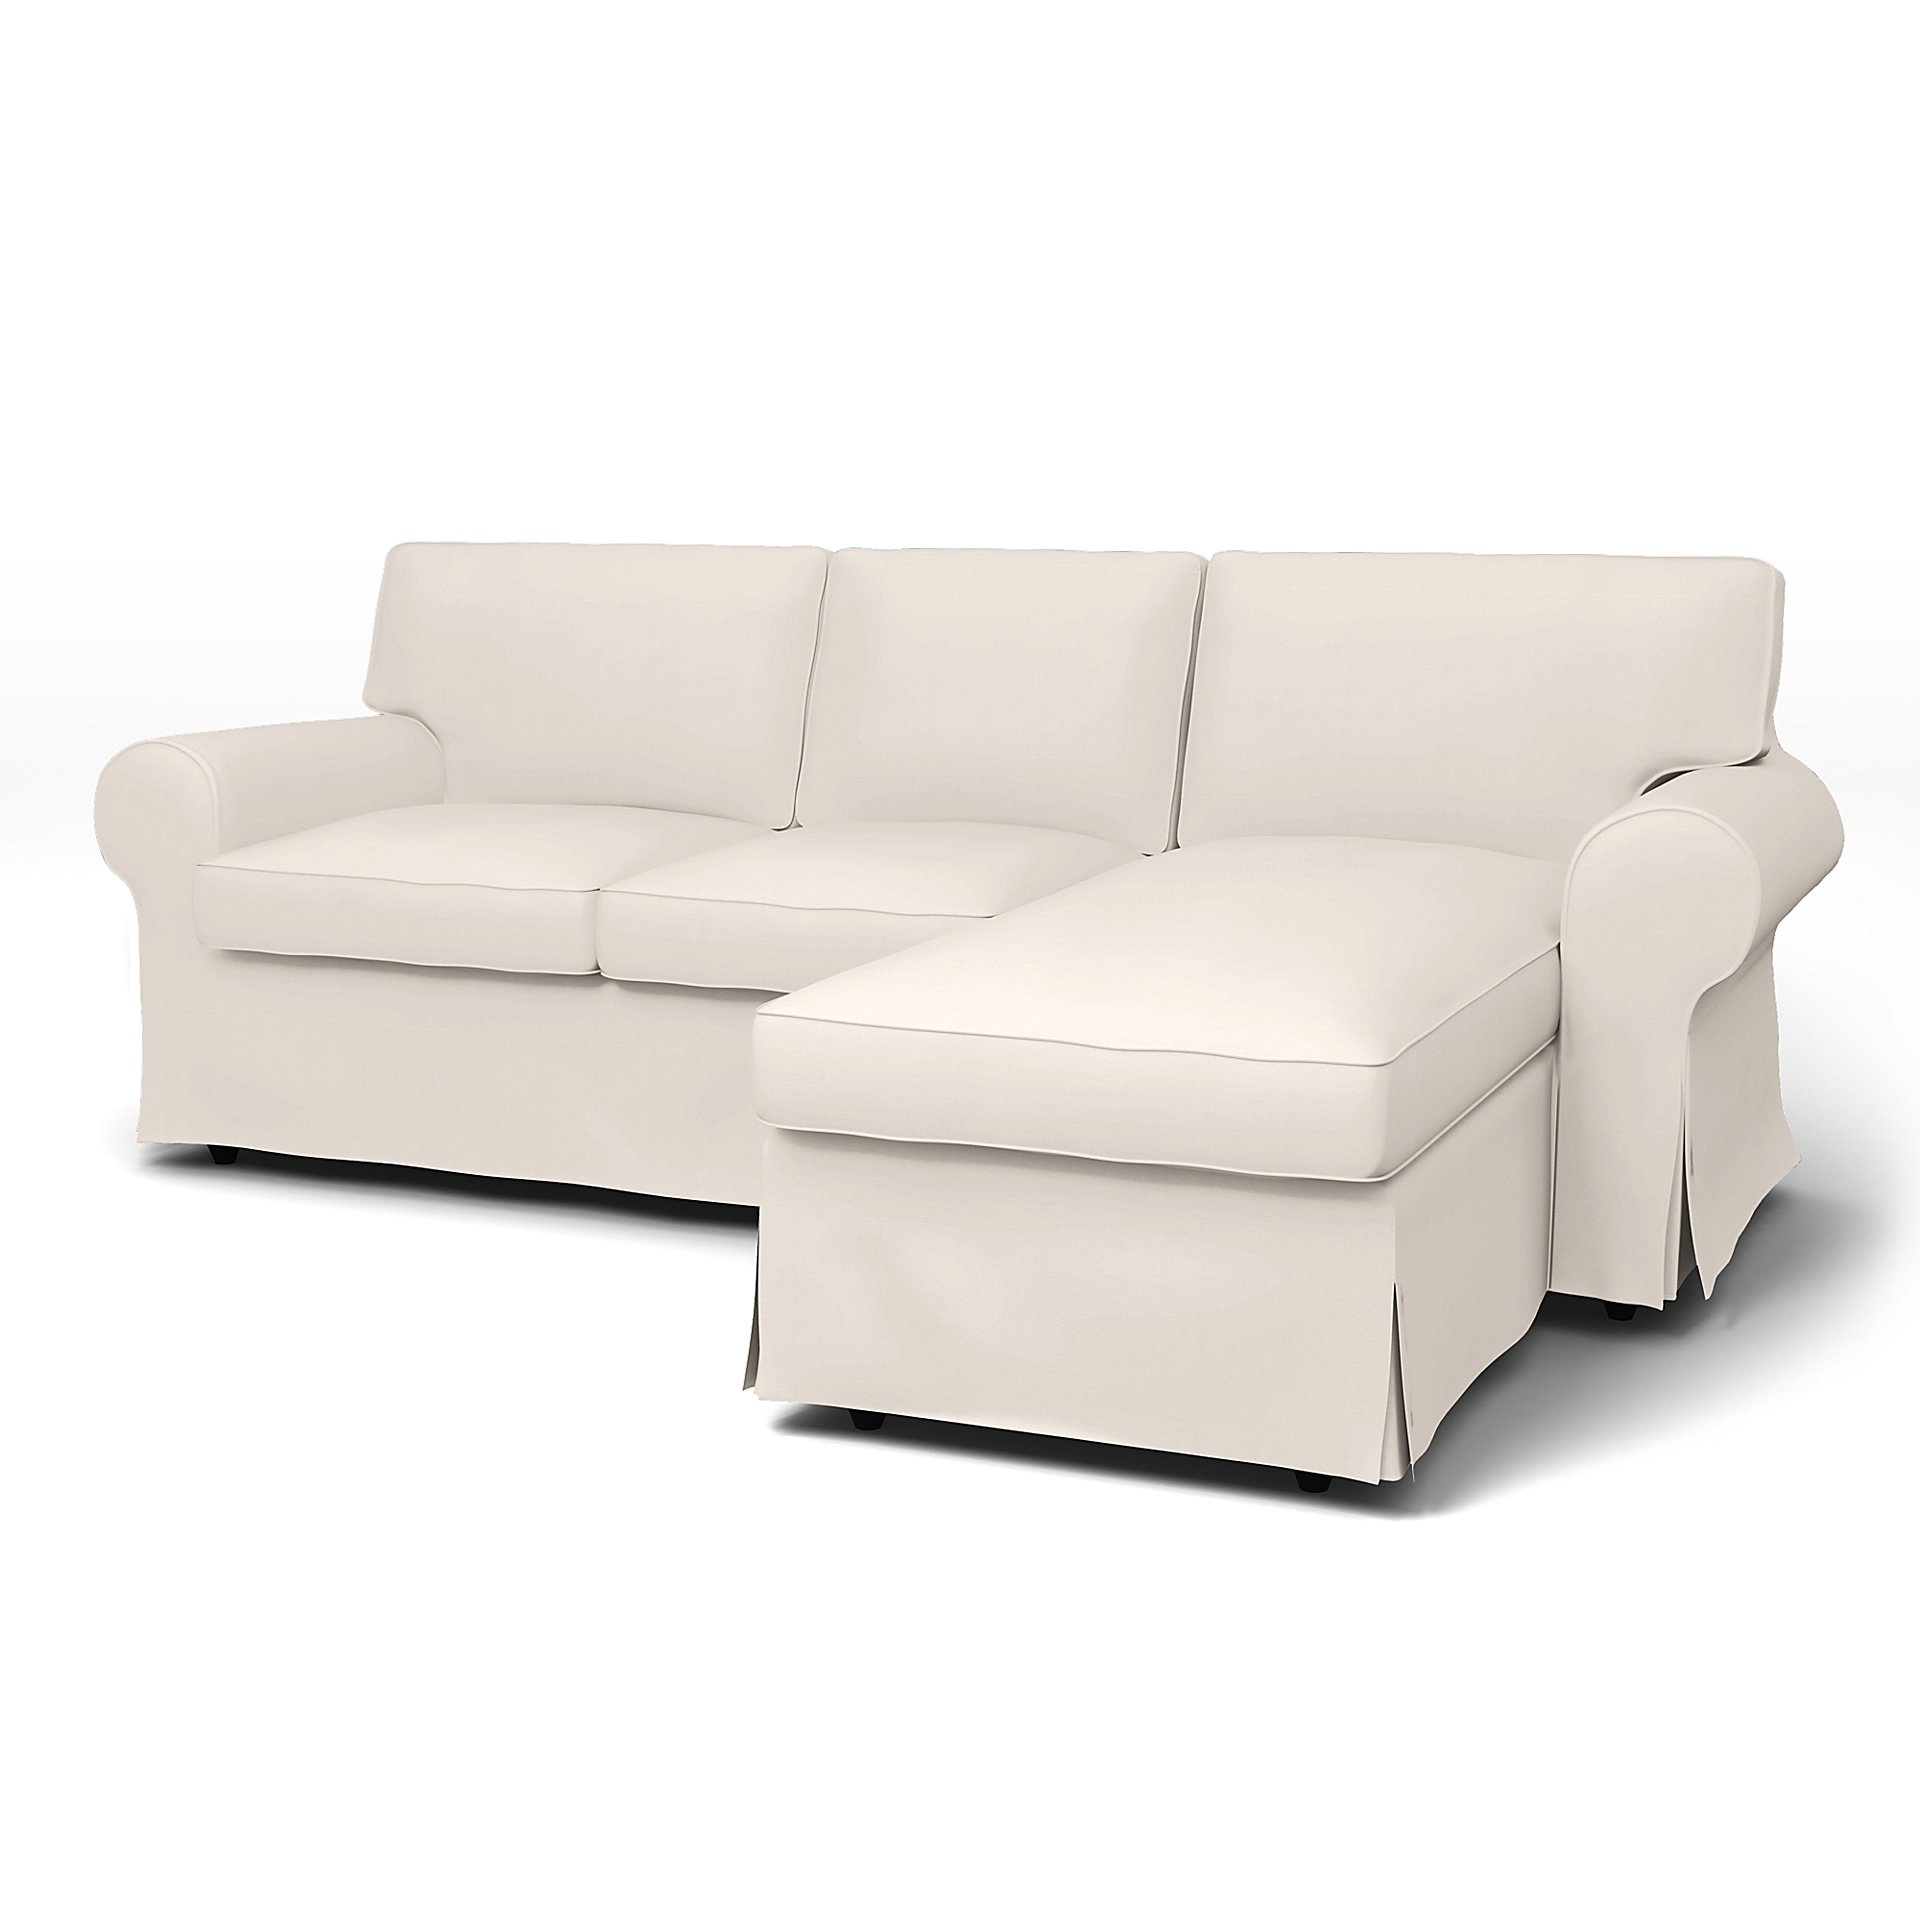 IKEA - Ektorp 3 Seater Sofa with Chaise Cover, Soft White, Cotton - Bemz